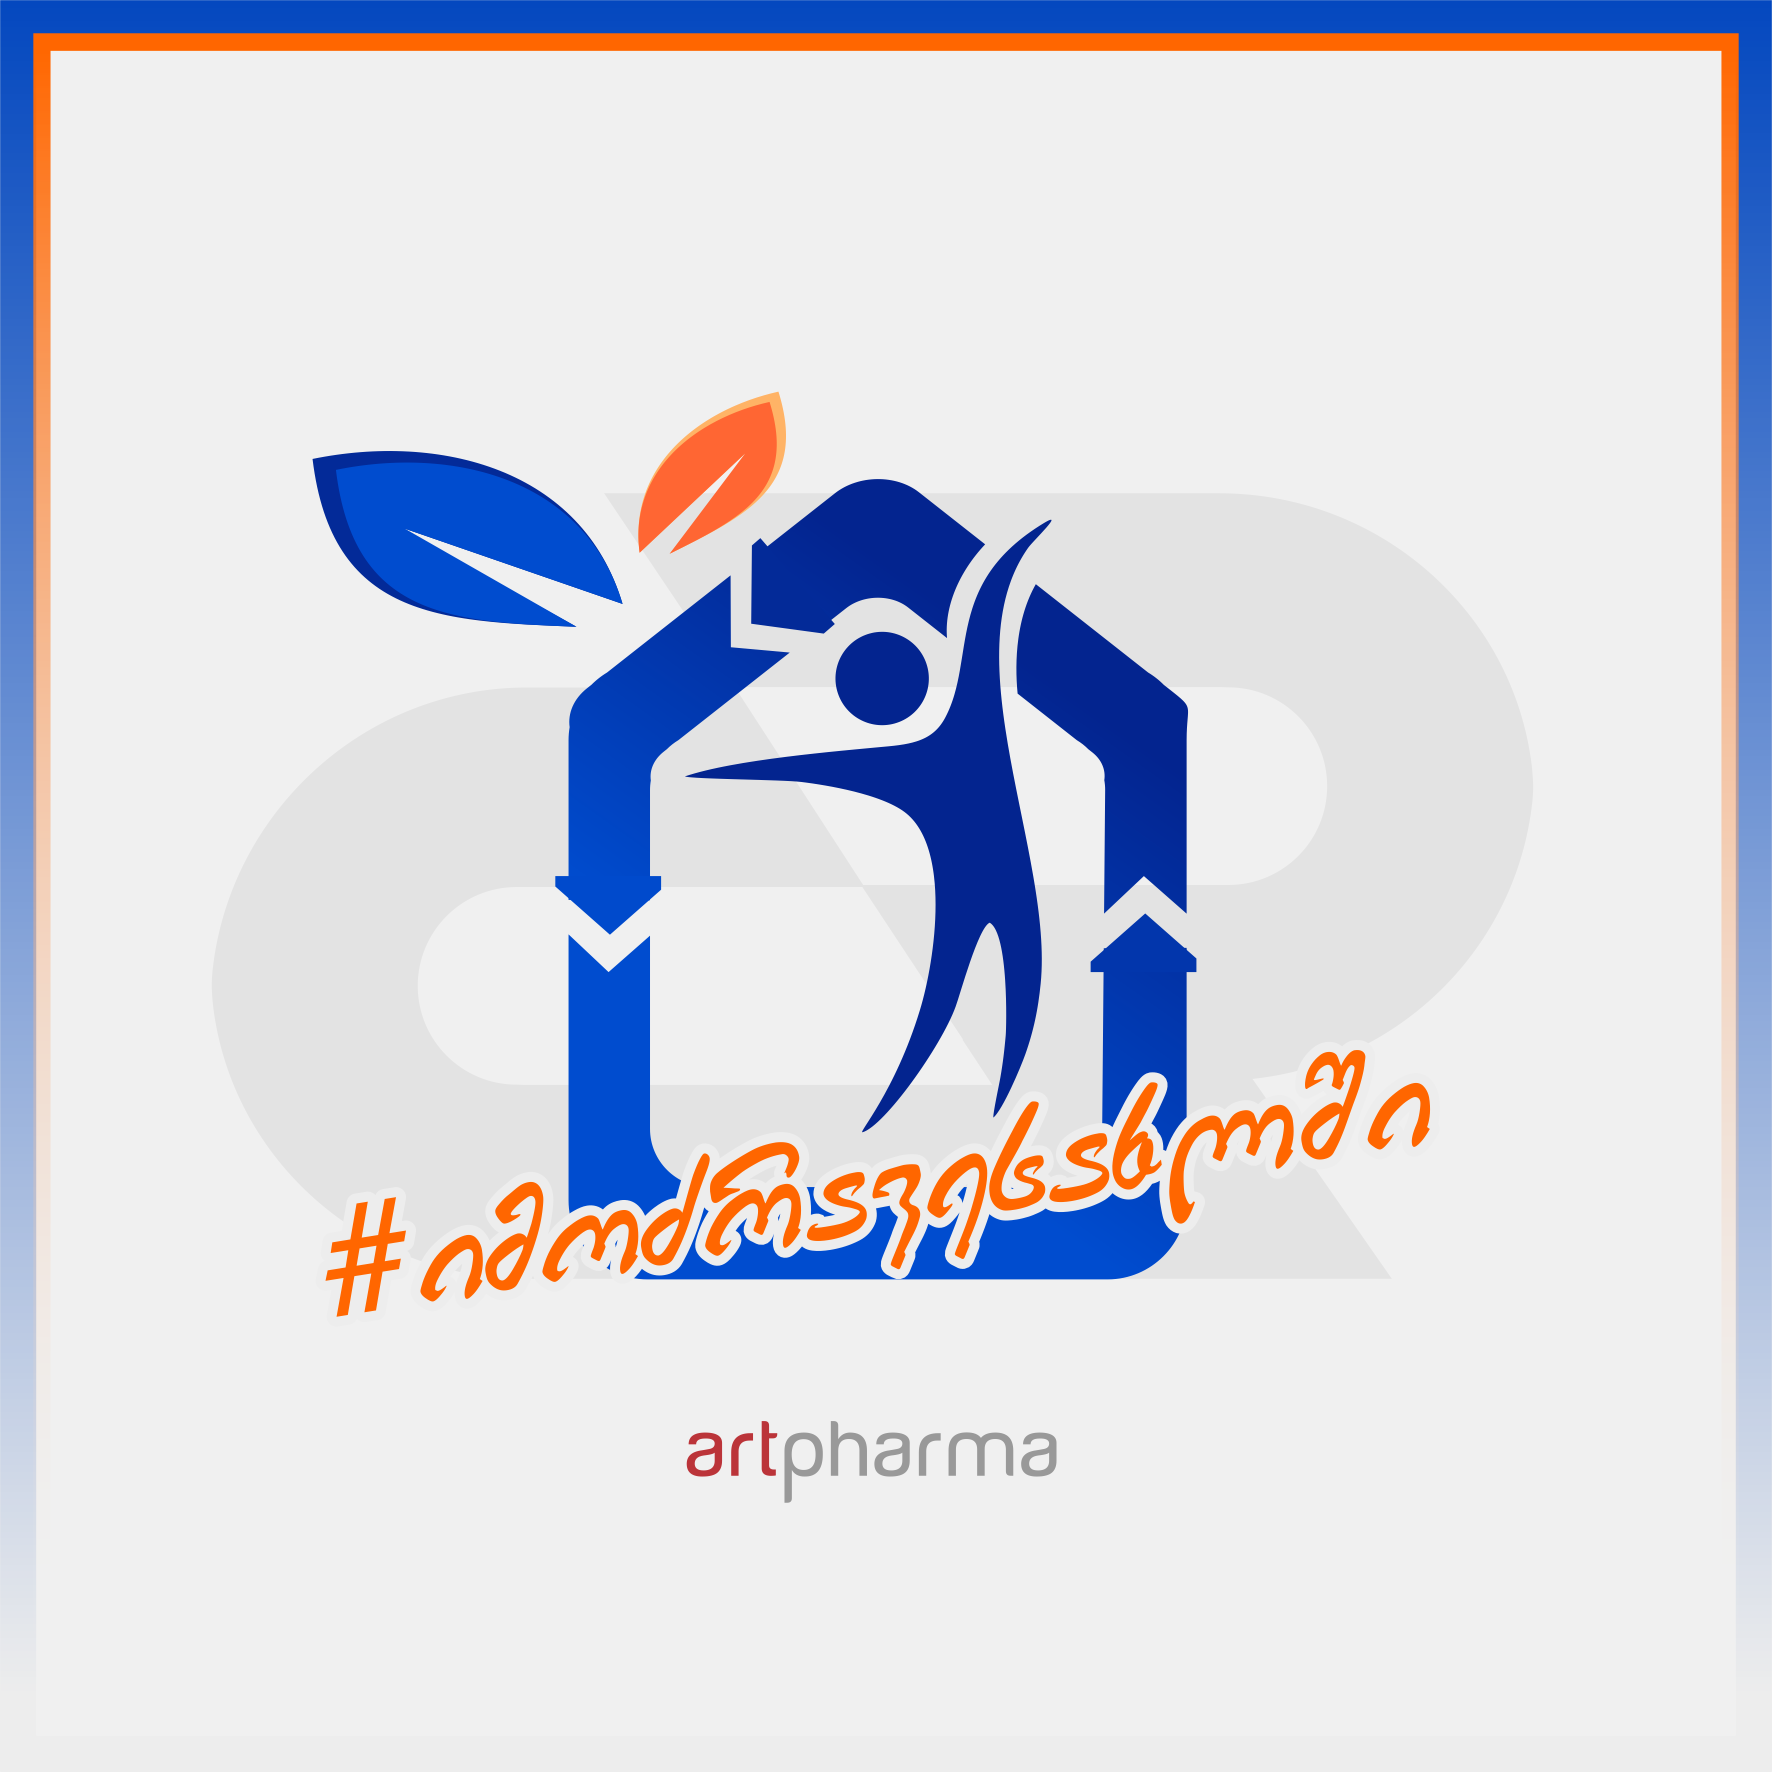 #Moveathome – New project on the official Facebook page of the company “Artpharma”